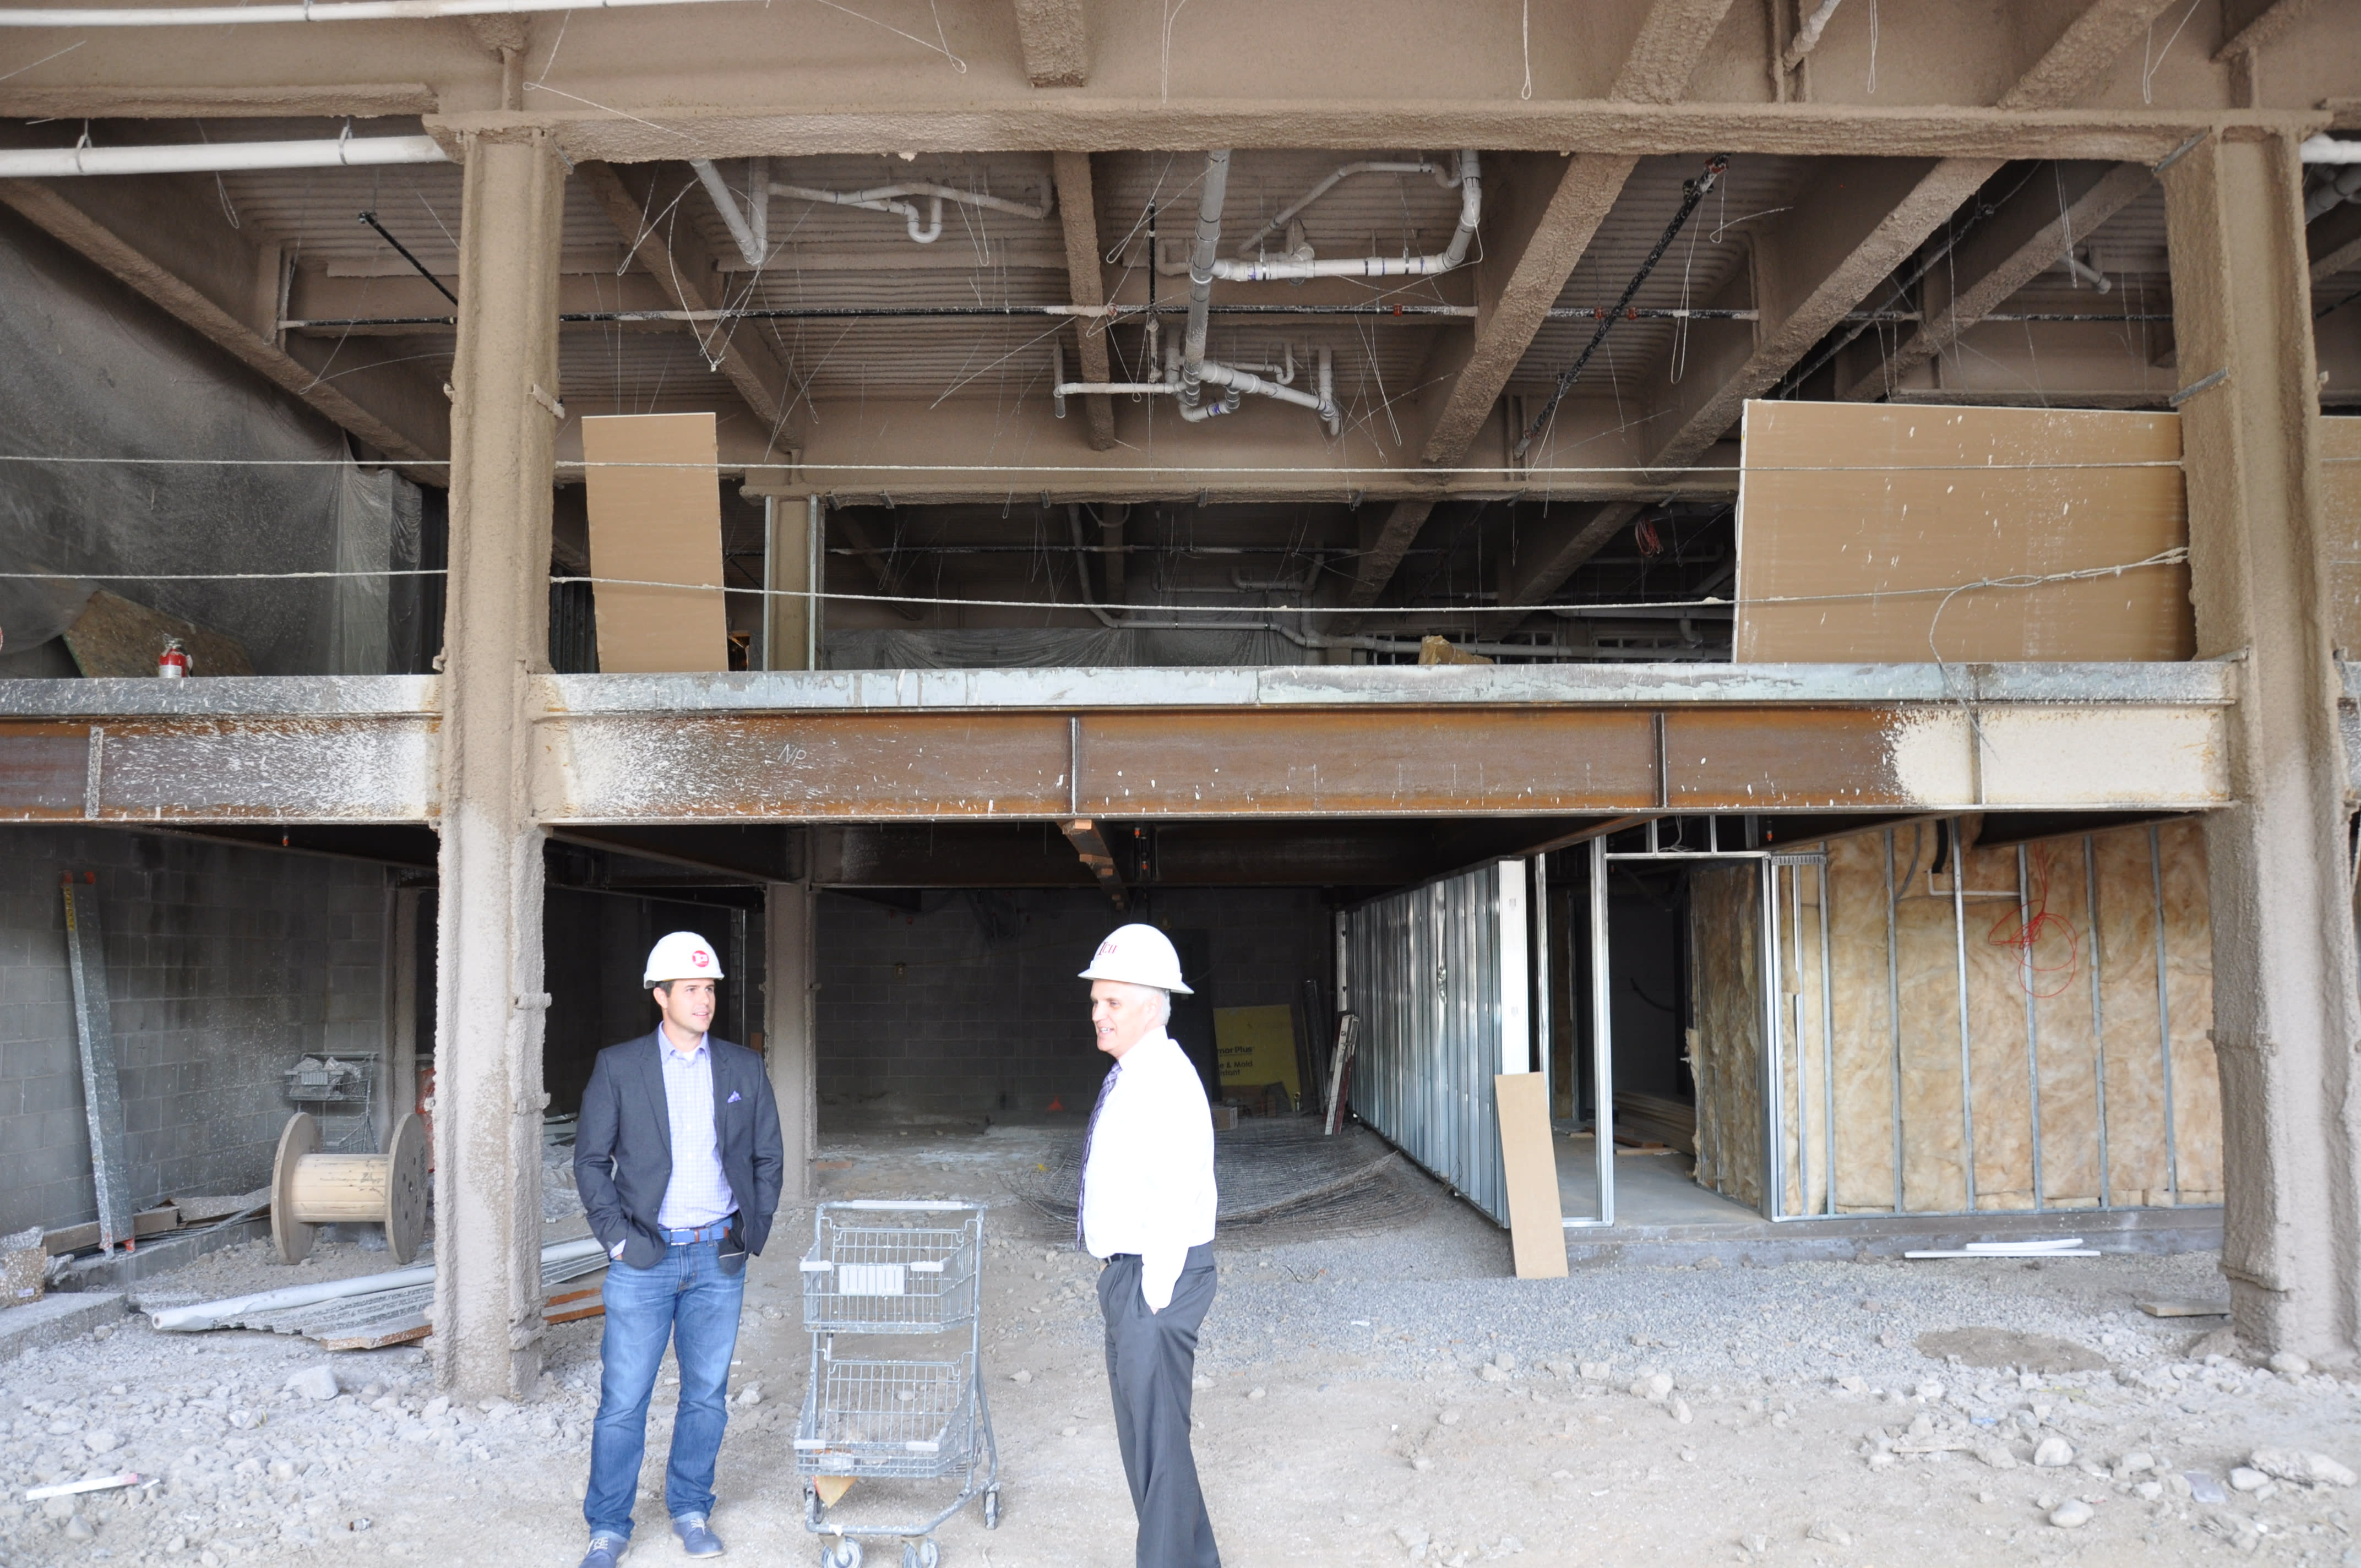 The ground floor of 63 will house a 2-story restaurant